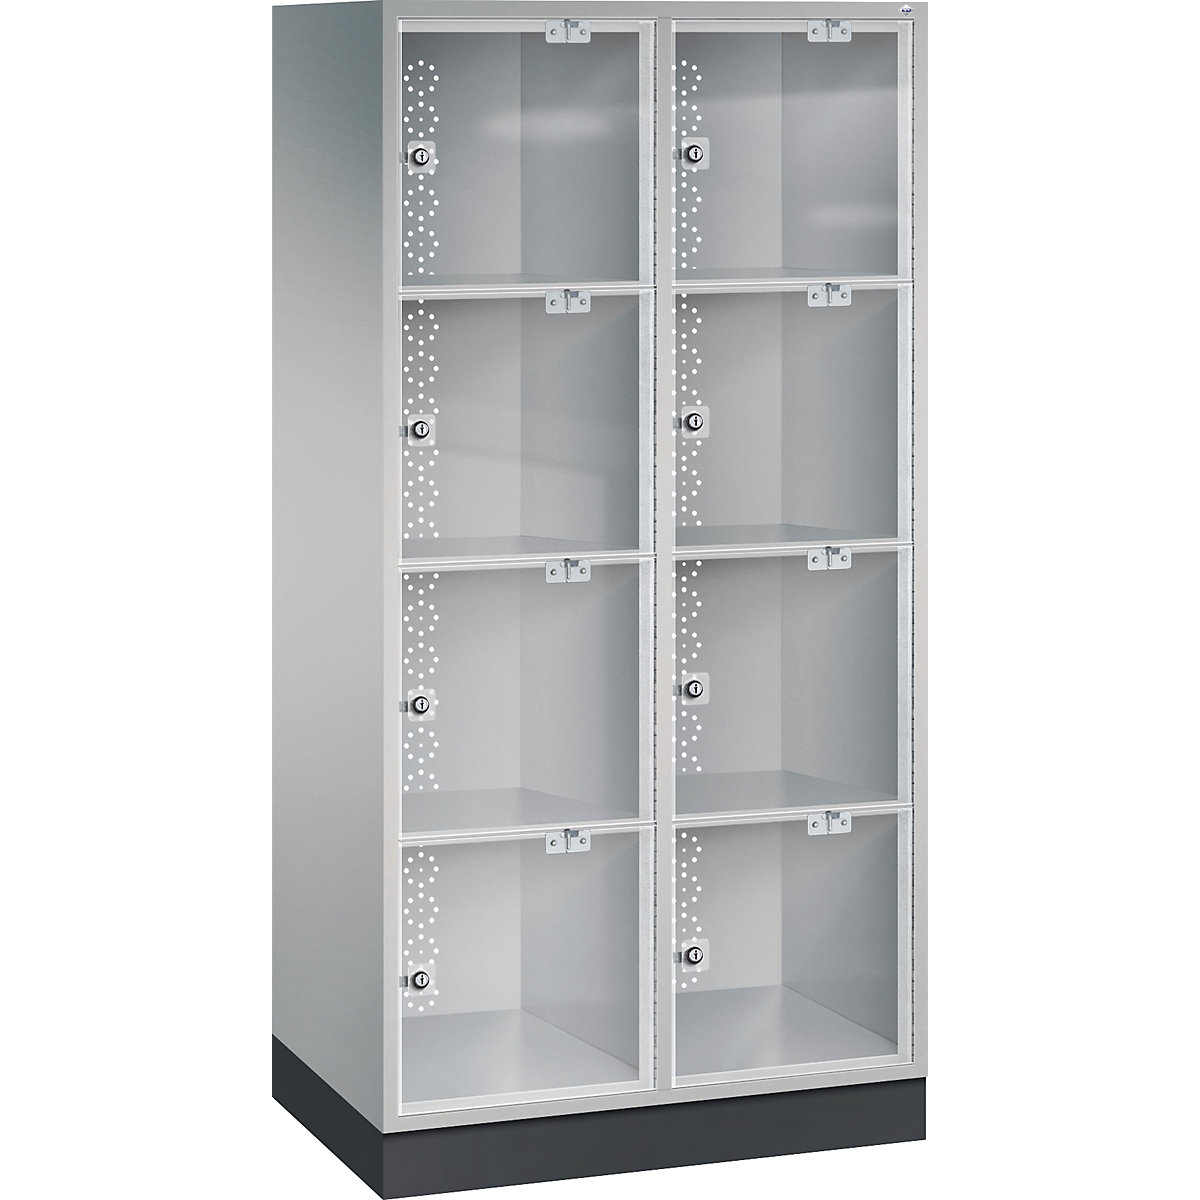 INTRO steel compartment locker with acrylic glass door – C+P, HxWxD 1750 x 820 x 500 mm, compartment height 380 mm, 8 compartments, white aluminium body